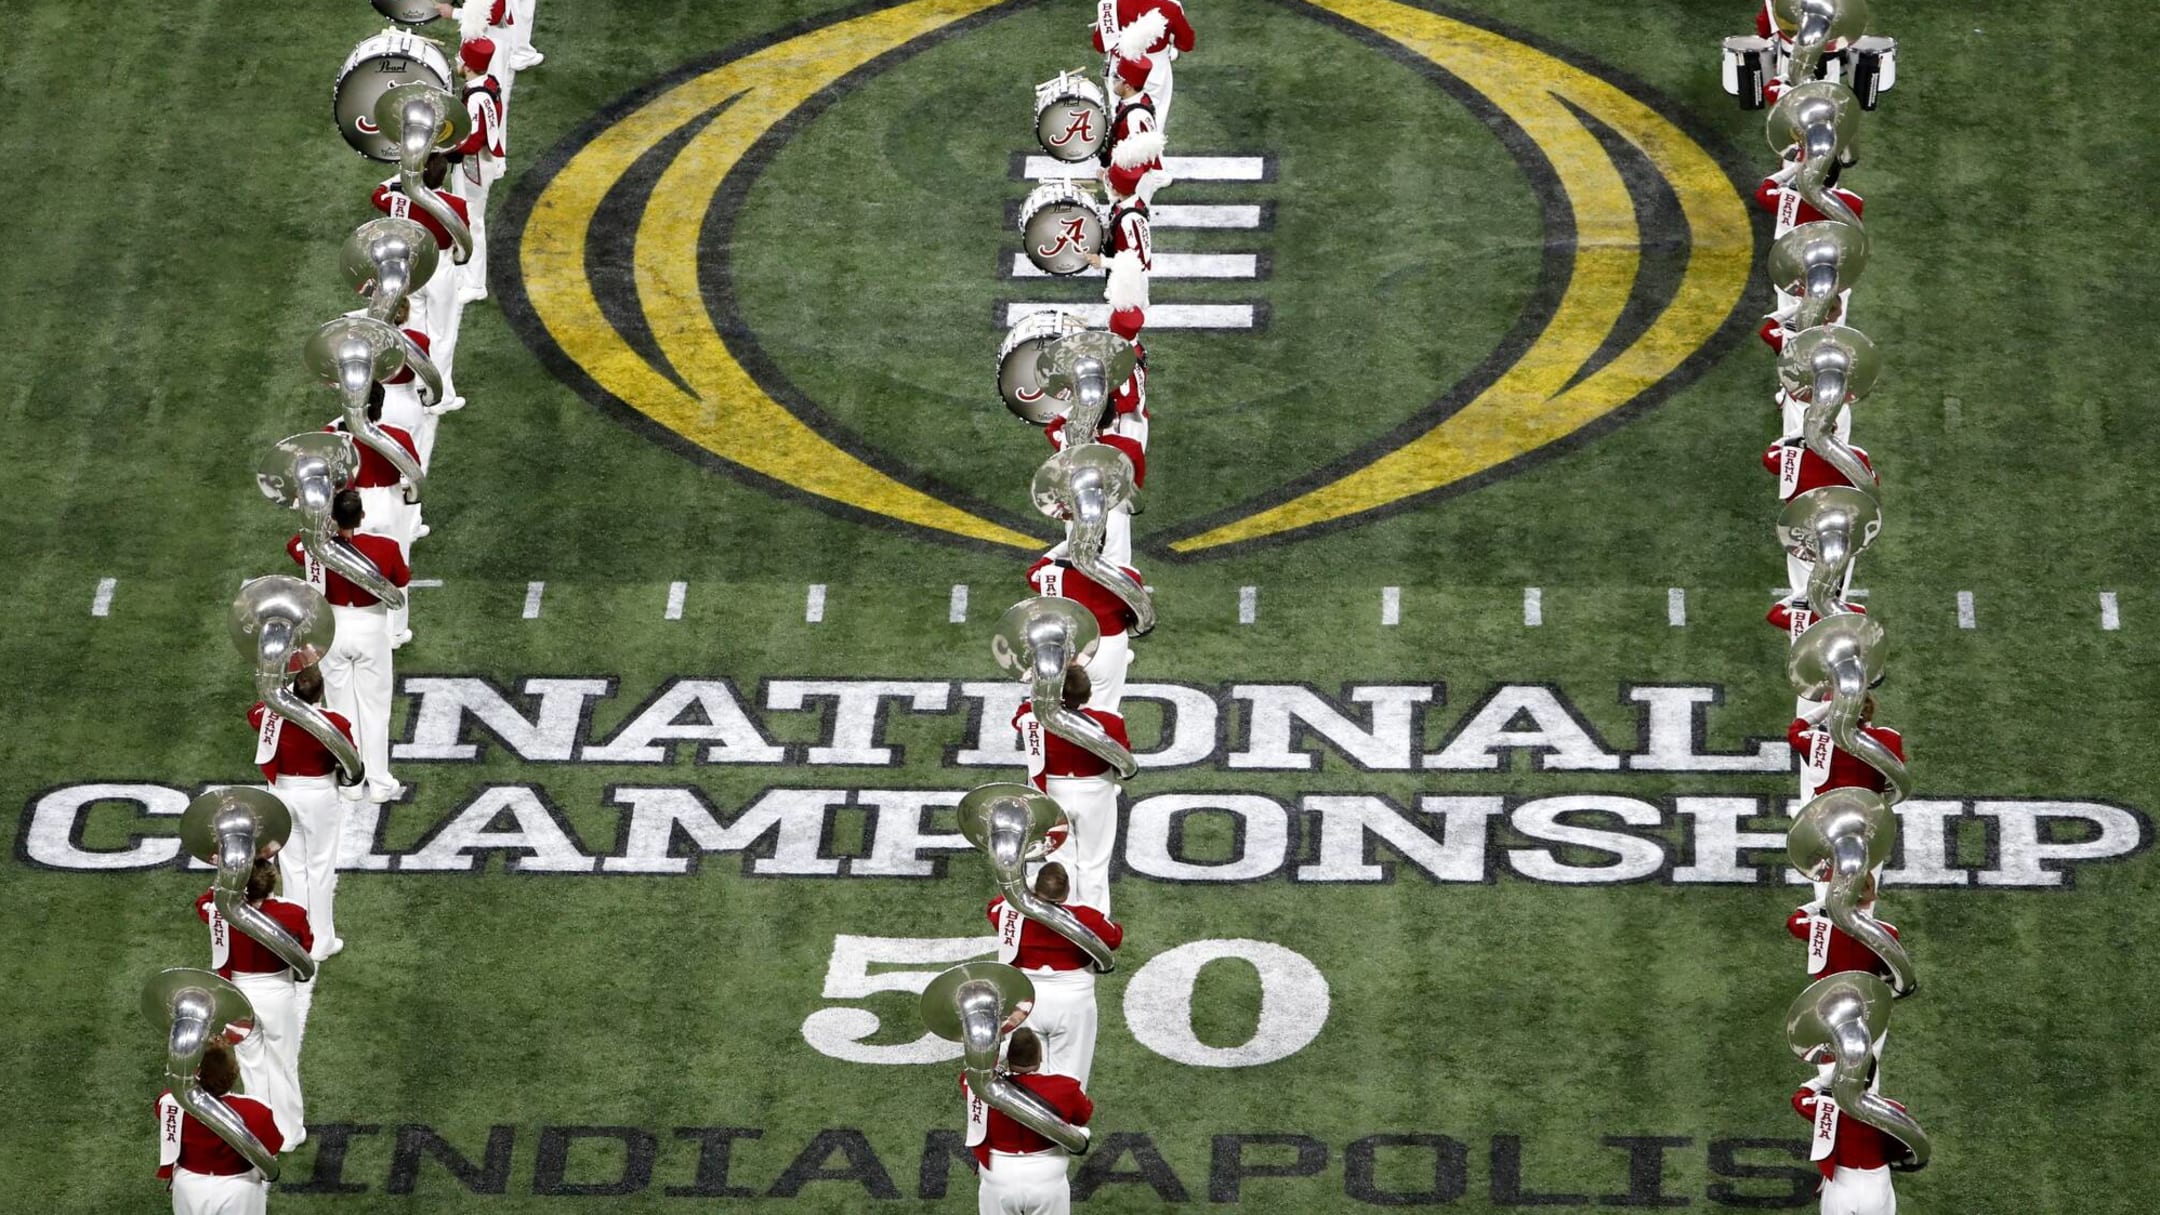 College Football Playoff with 12 teams would have looked like this